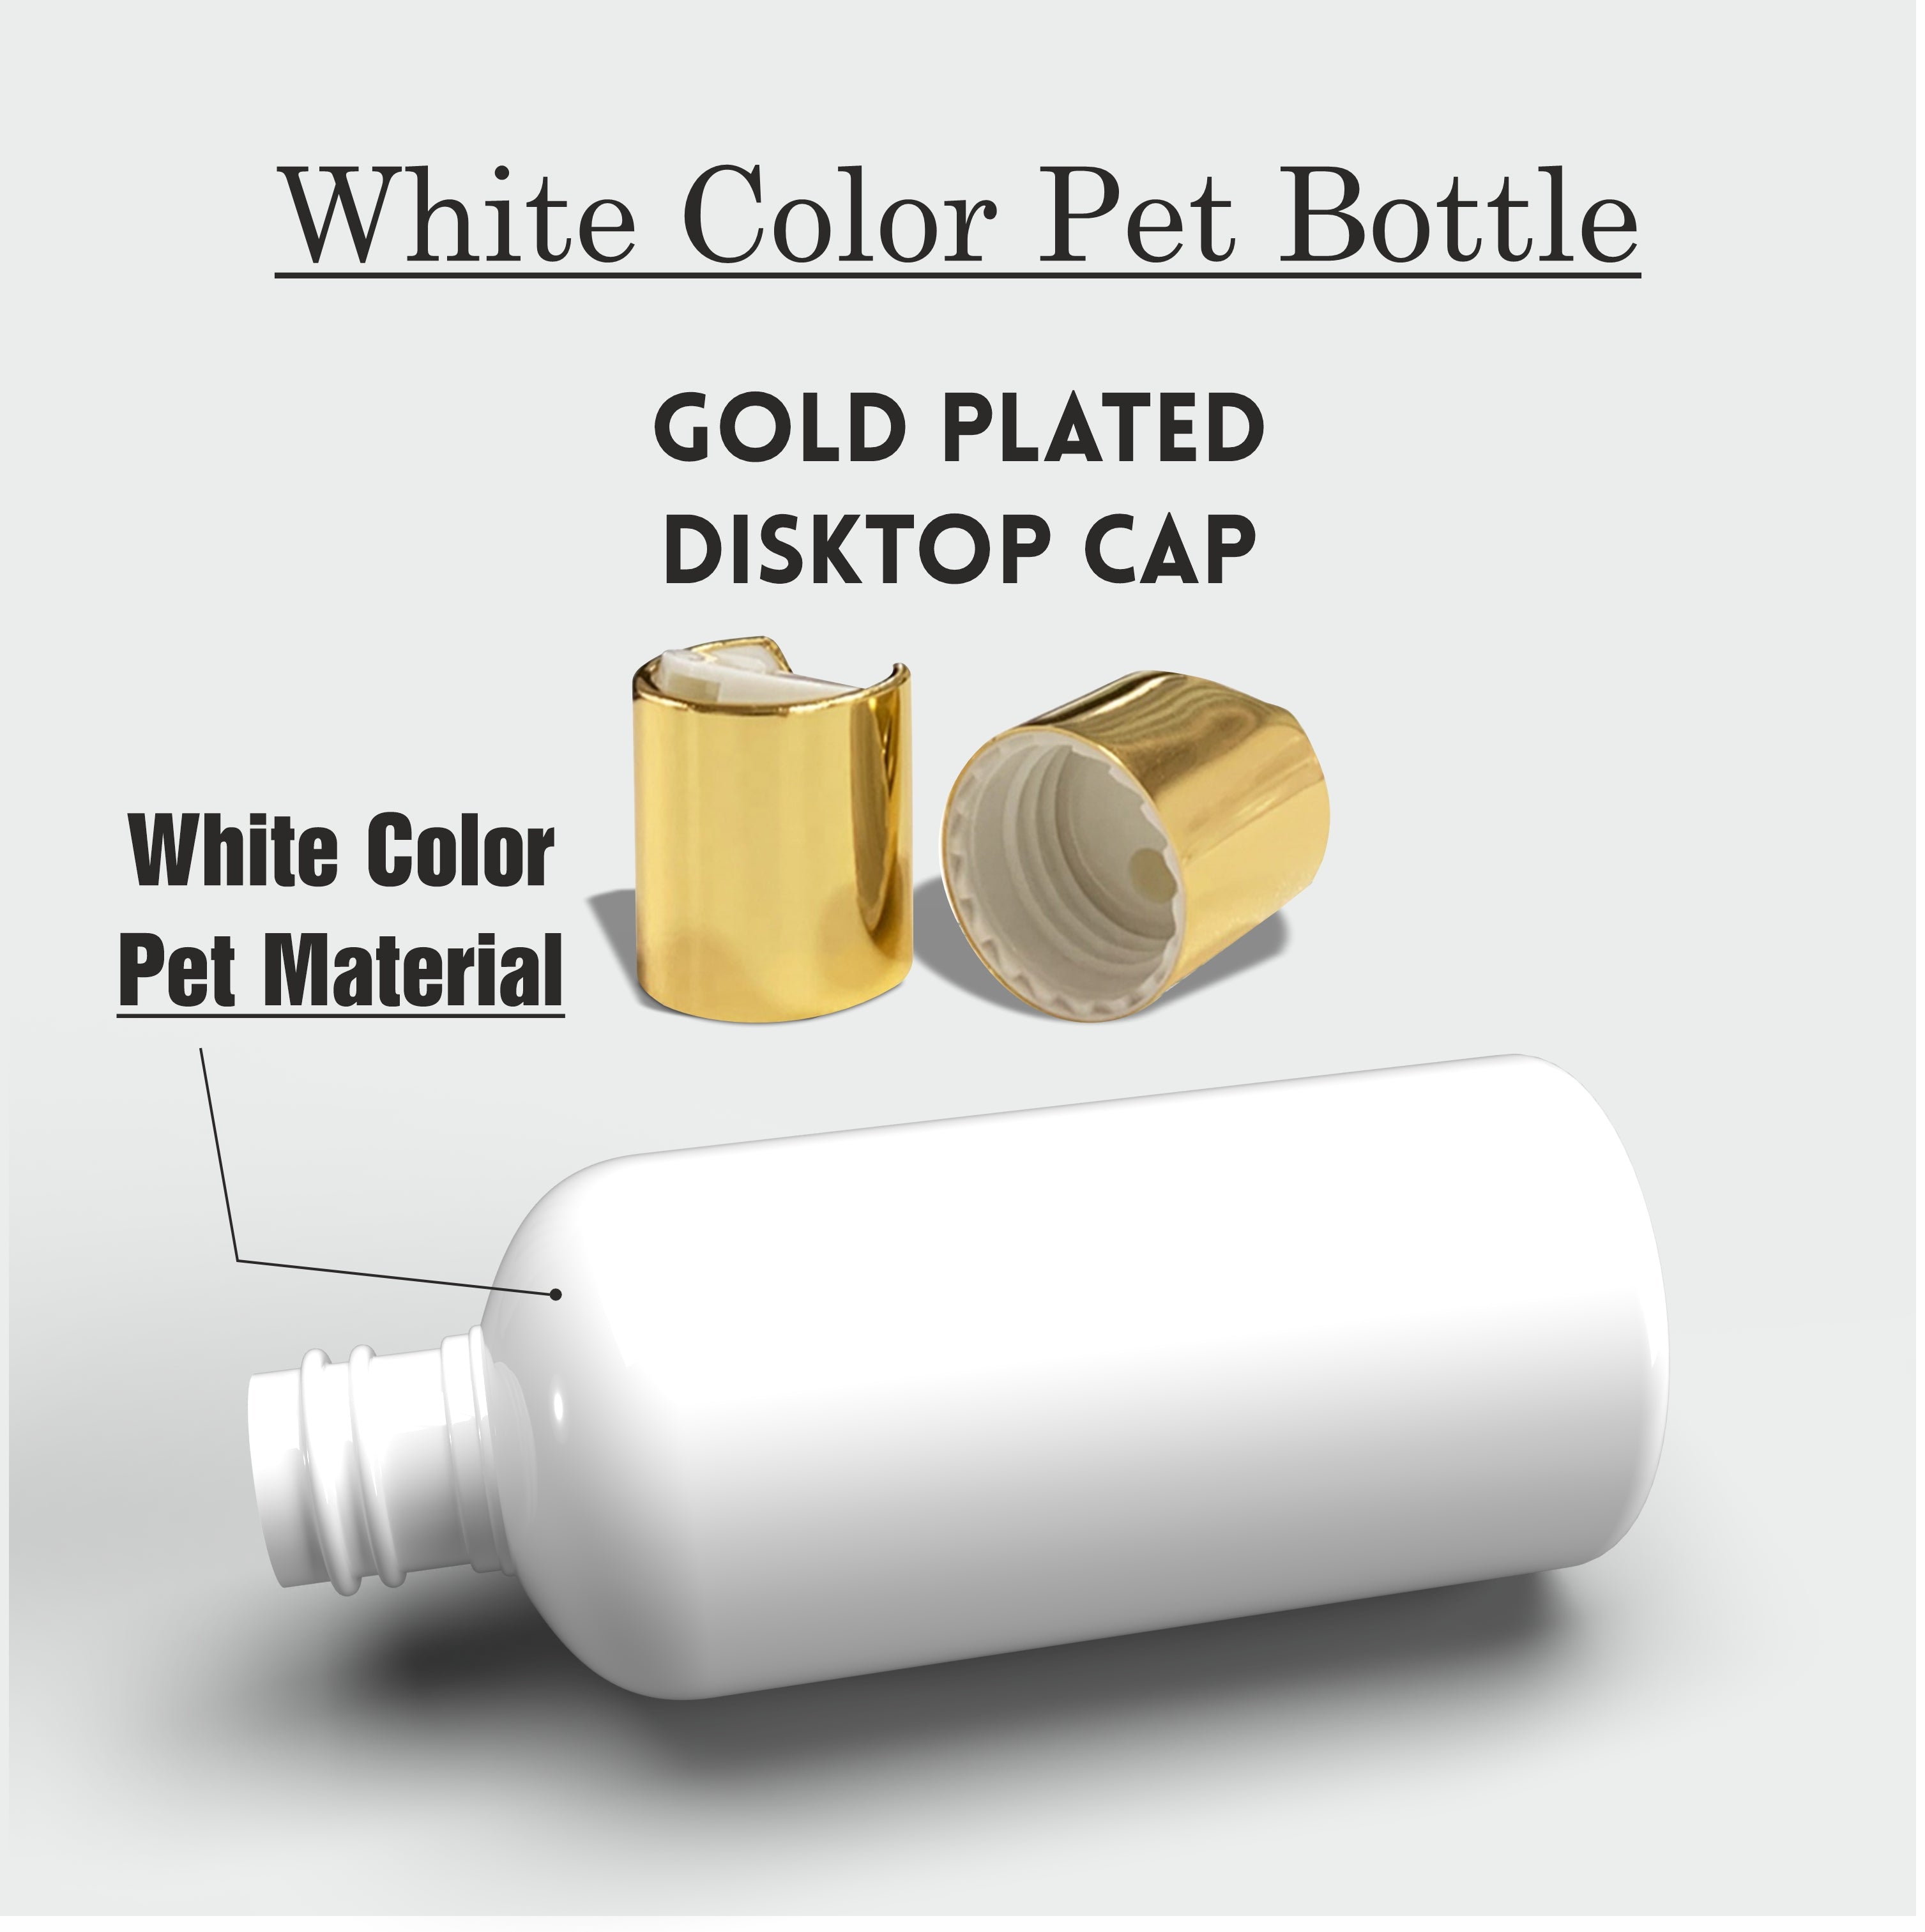 |ZMW73| MILKY WHITE ROUND SHAPE PET BOTTLE WITH GOLD PLATED DISKTOP CAP Available Size: 300ml